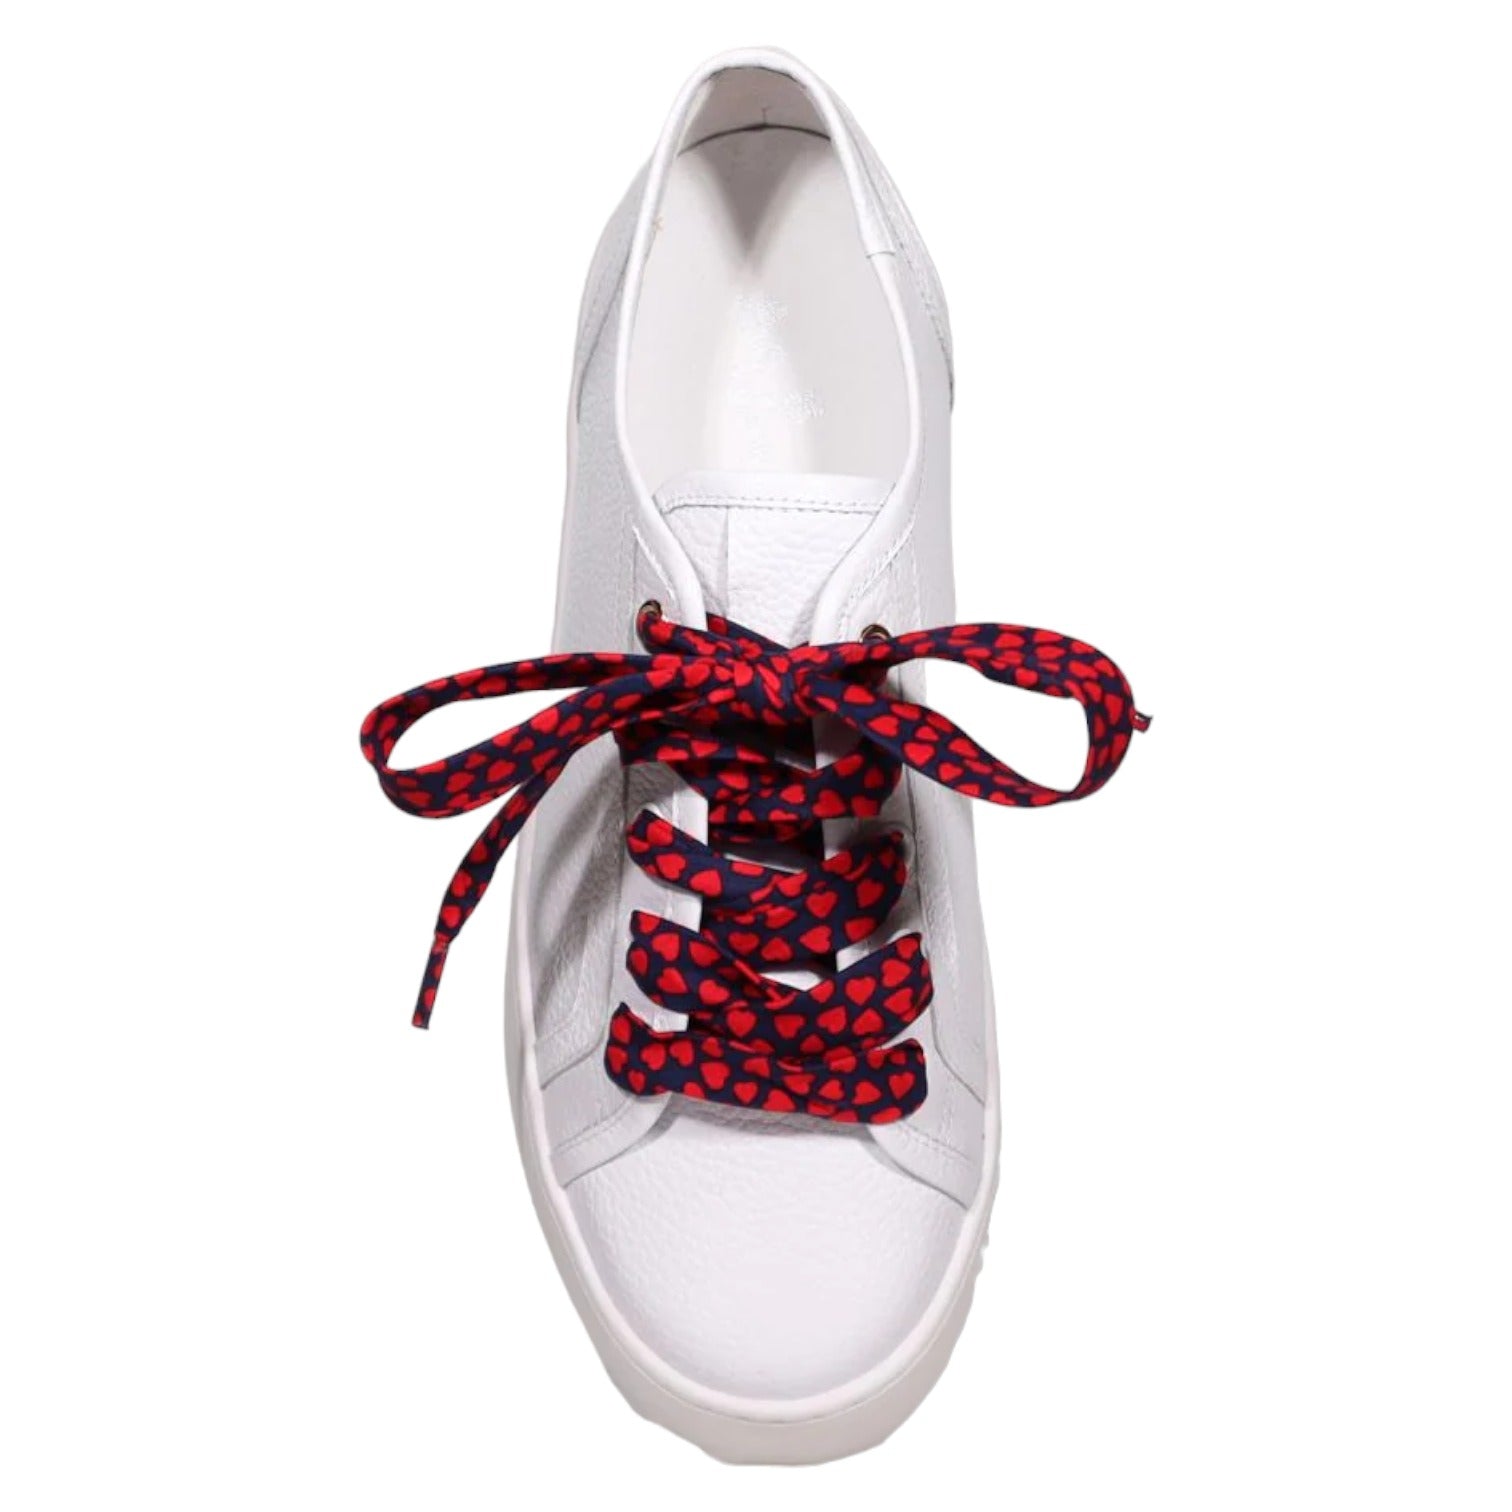 Minx Sweetheart Laces